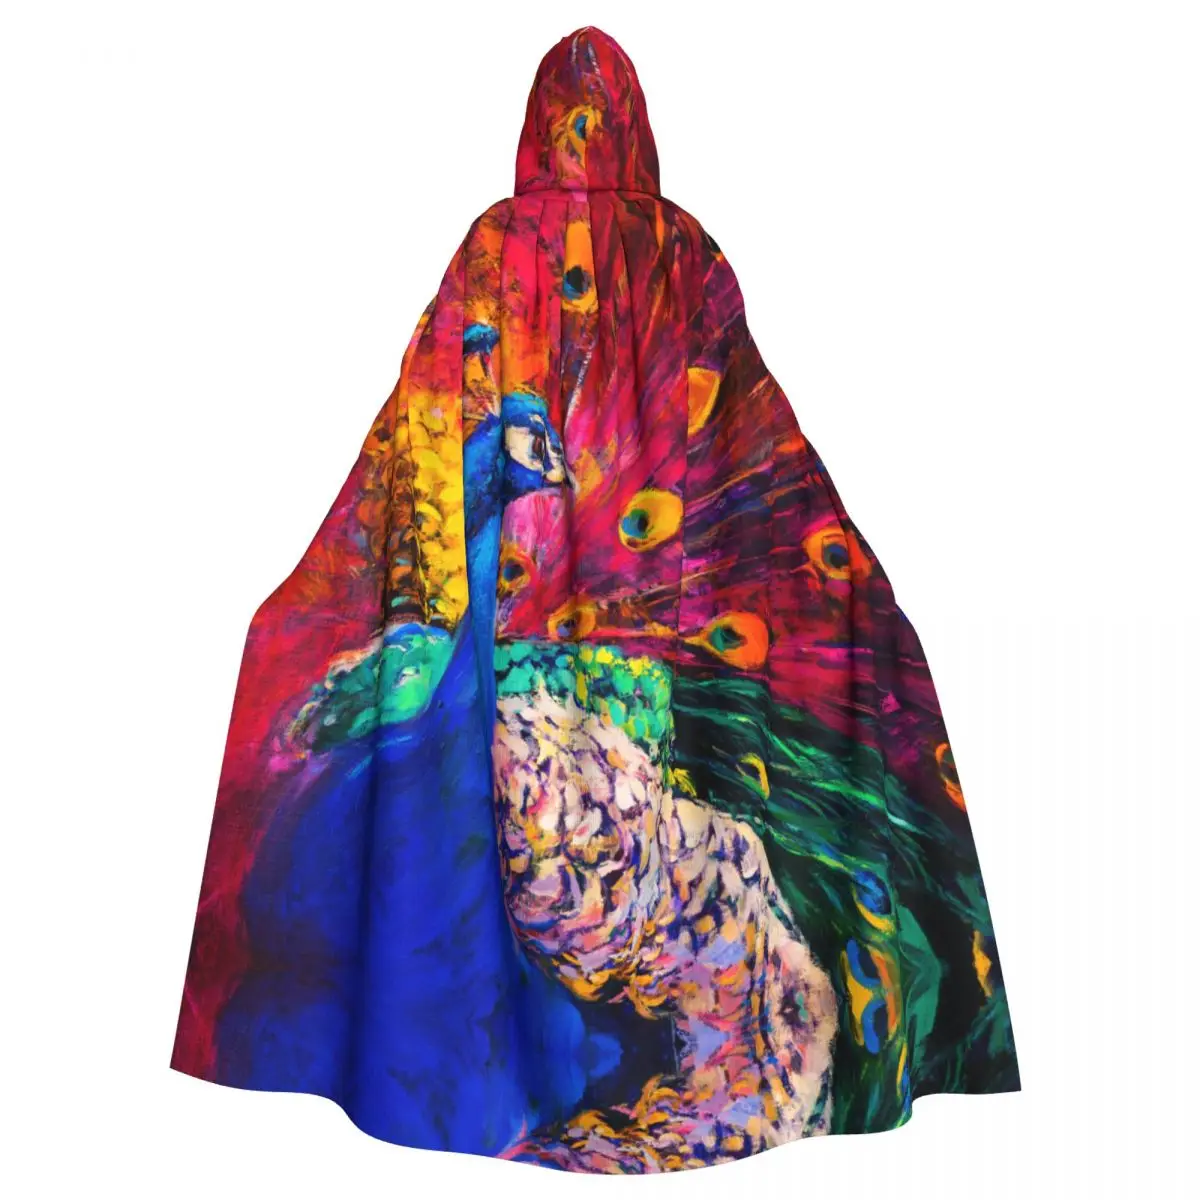 

Hooded Cloak Unisex Cloak with Hood Multicolored Peacock Painting Cloak Vampire Witch Cape Cosplay Costume